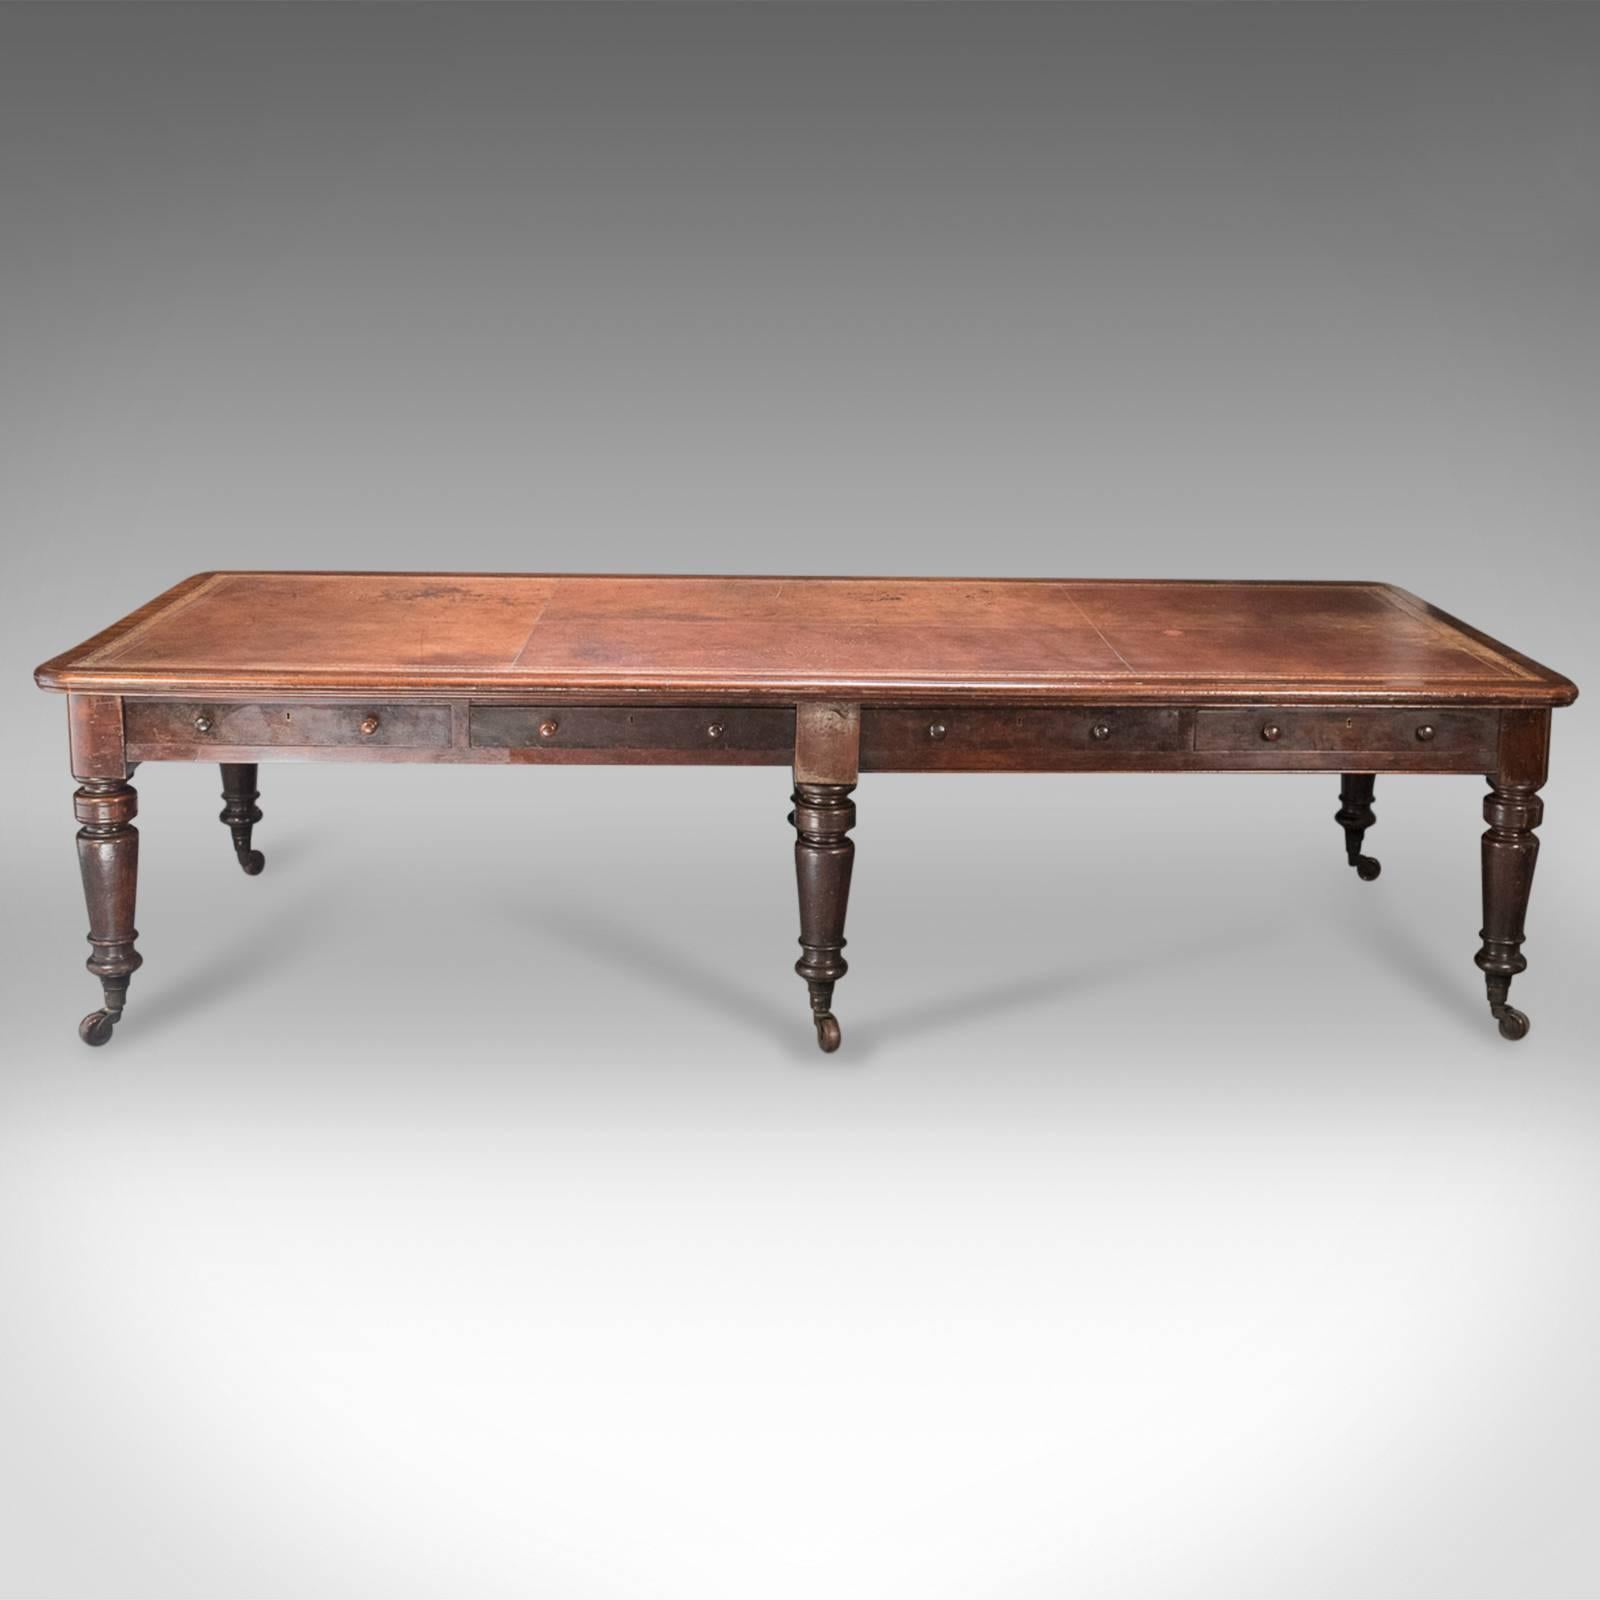 This is a very large antique library table dating to the mid-19th century.

Rare to find in such large proportions, this table stands upon six stout baluster turned legs, riding upon the original grand ceramic castors in brass cups. 

Four